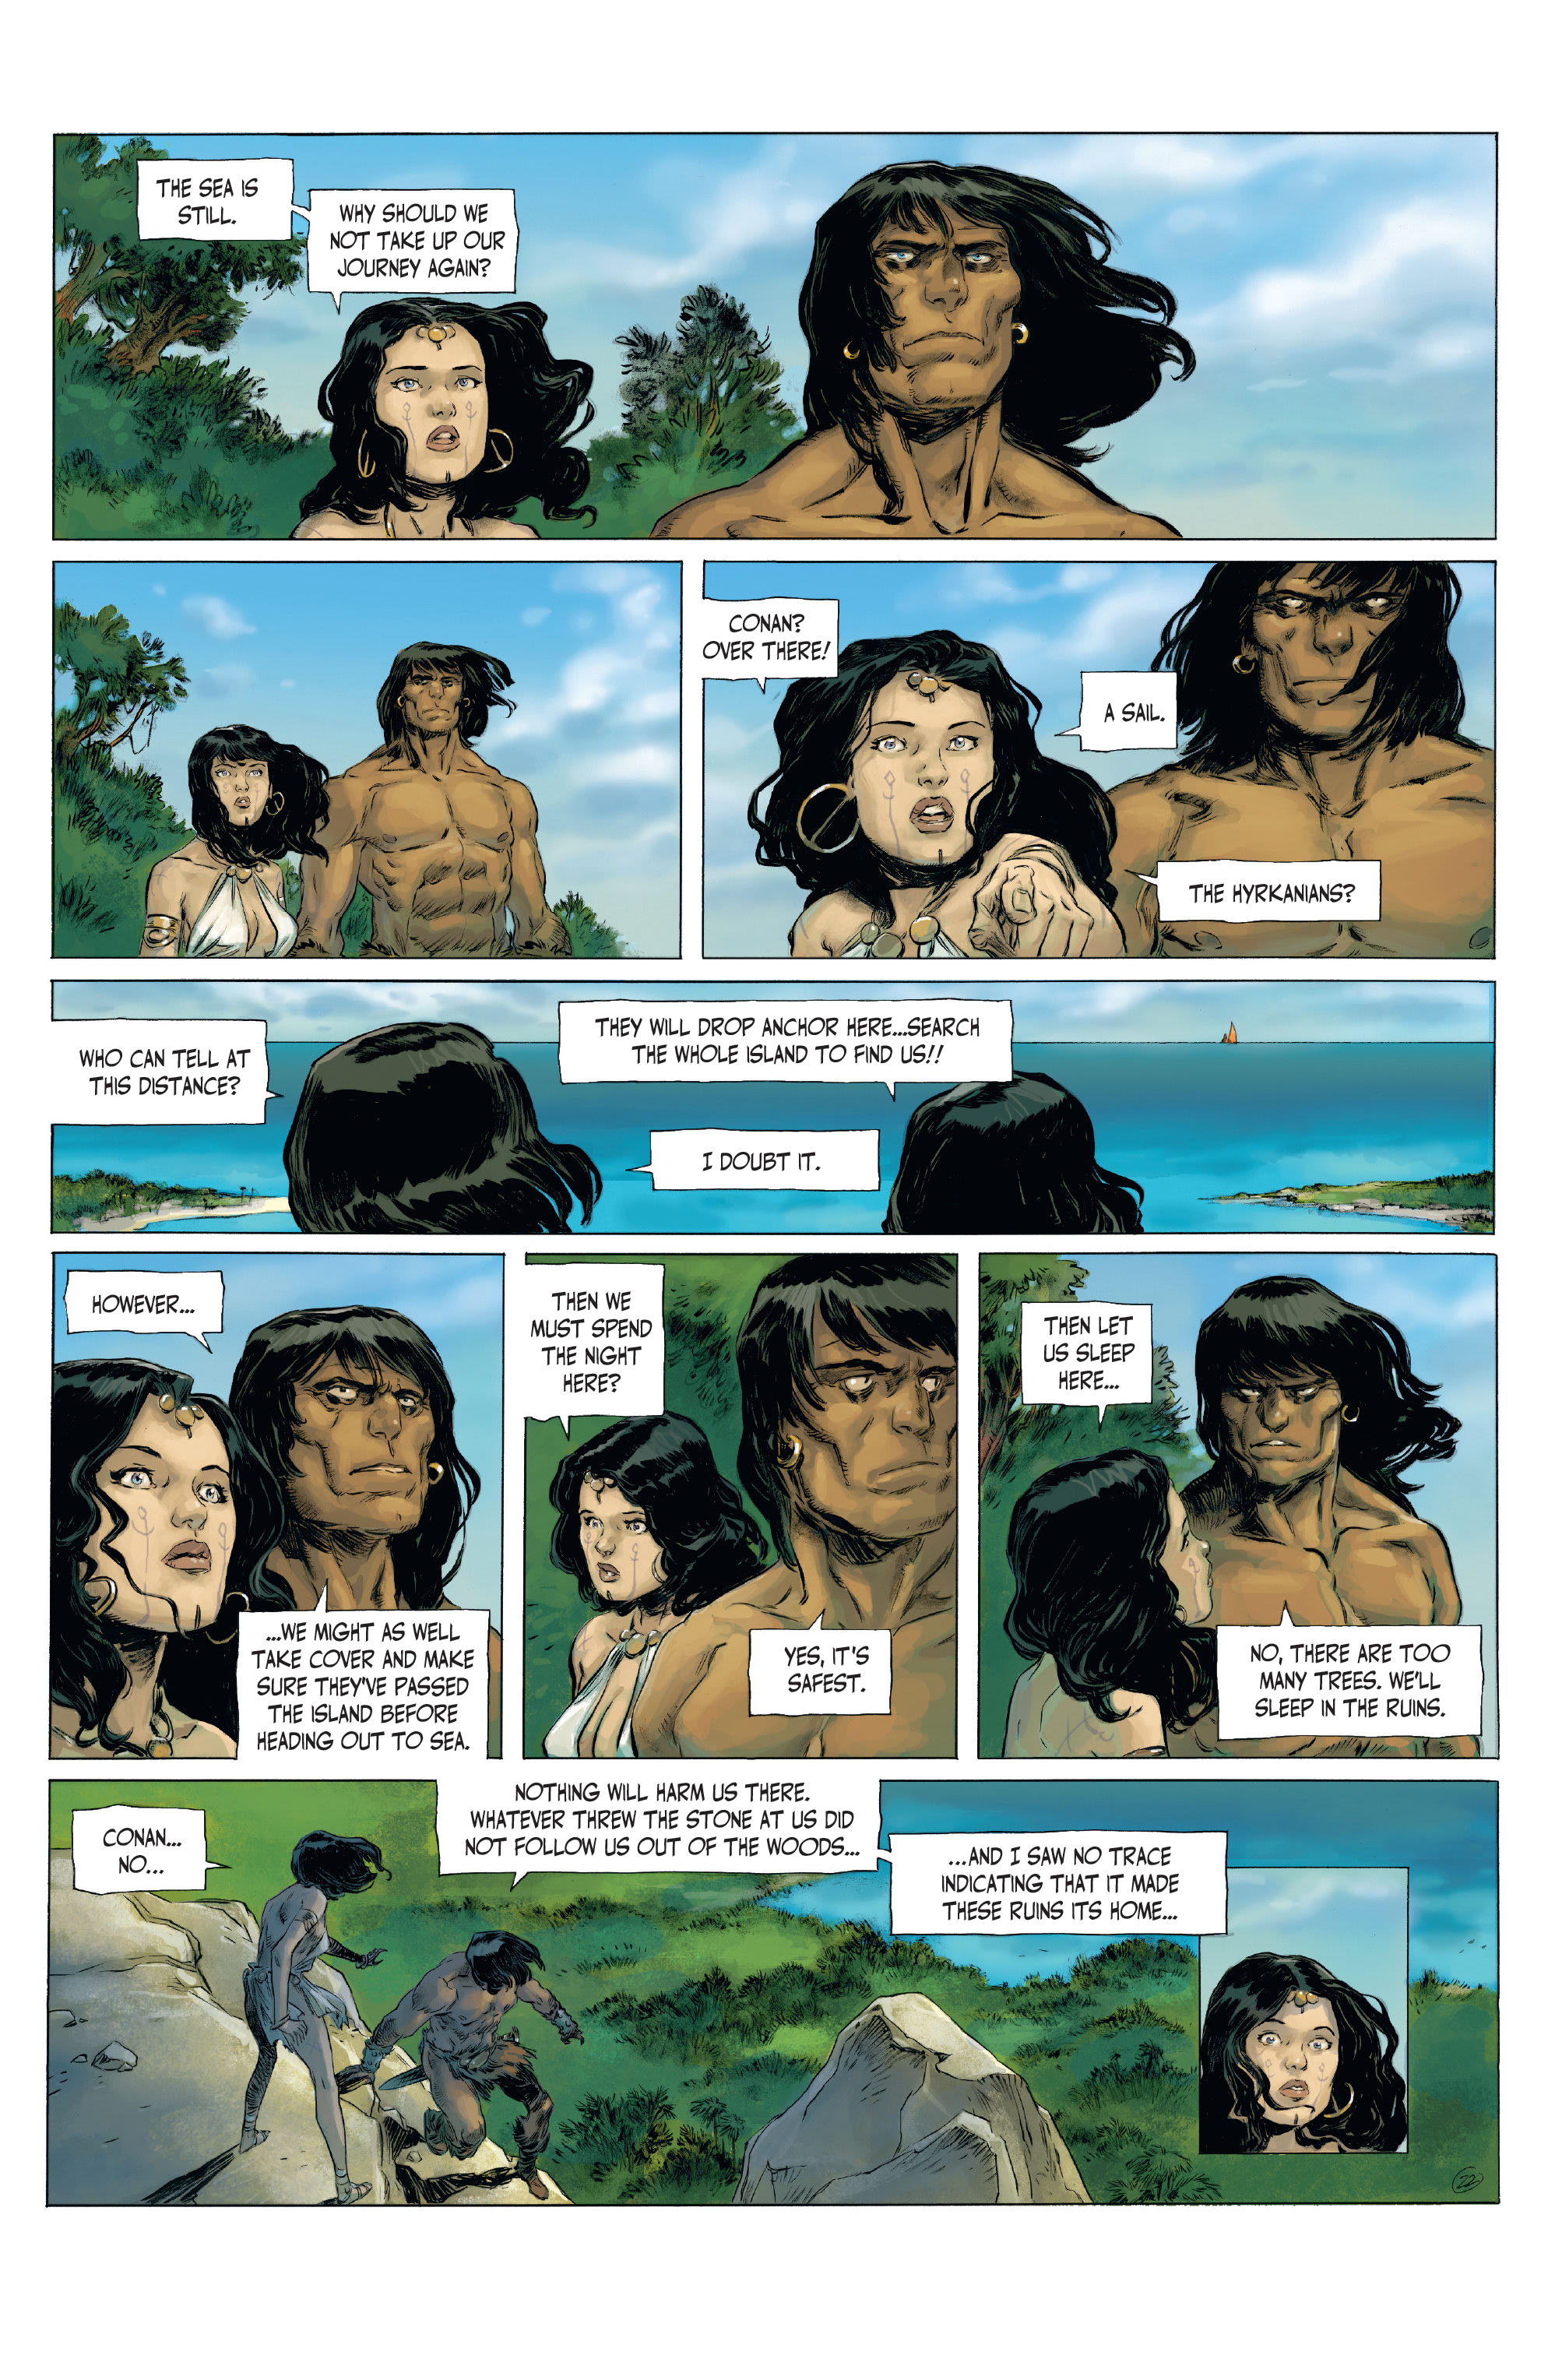 The Cimmerian: Iron Shadows in the Moon (2021-): Chapter 2 - Page 4